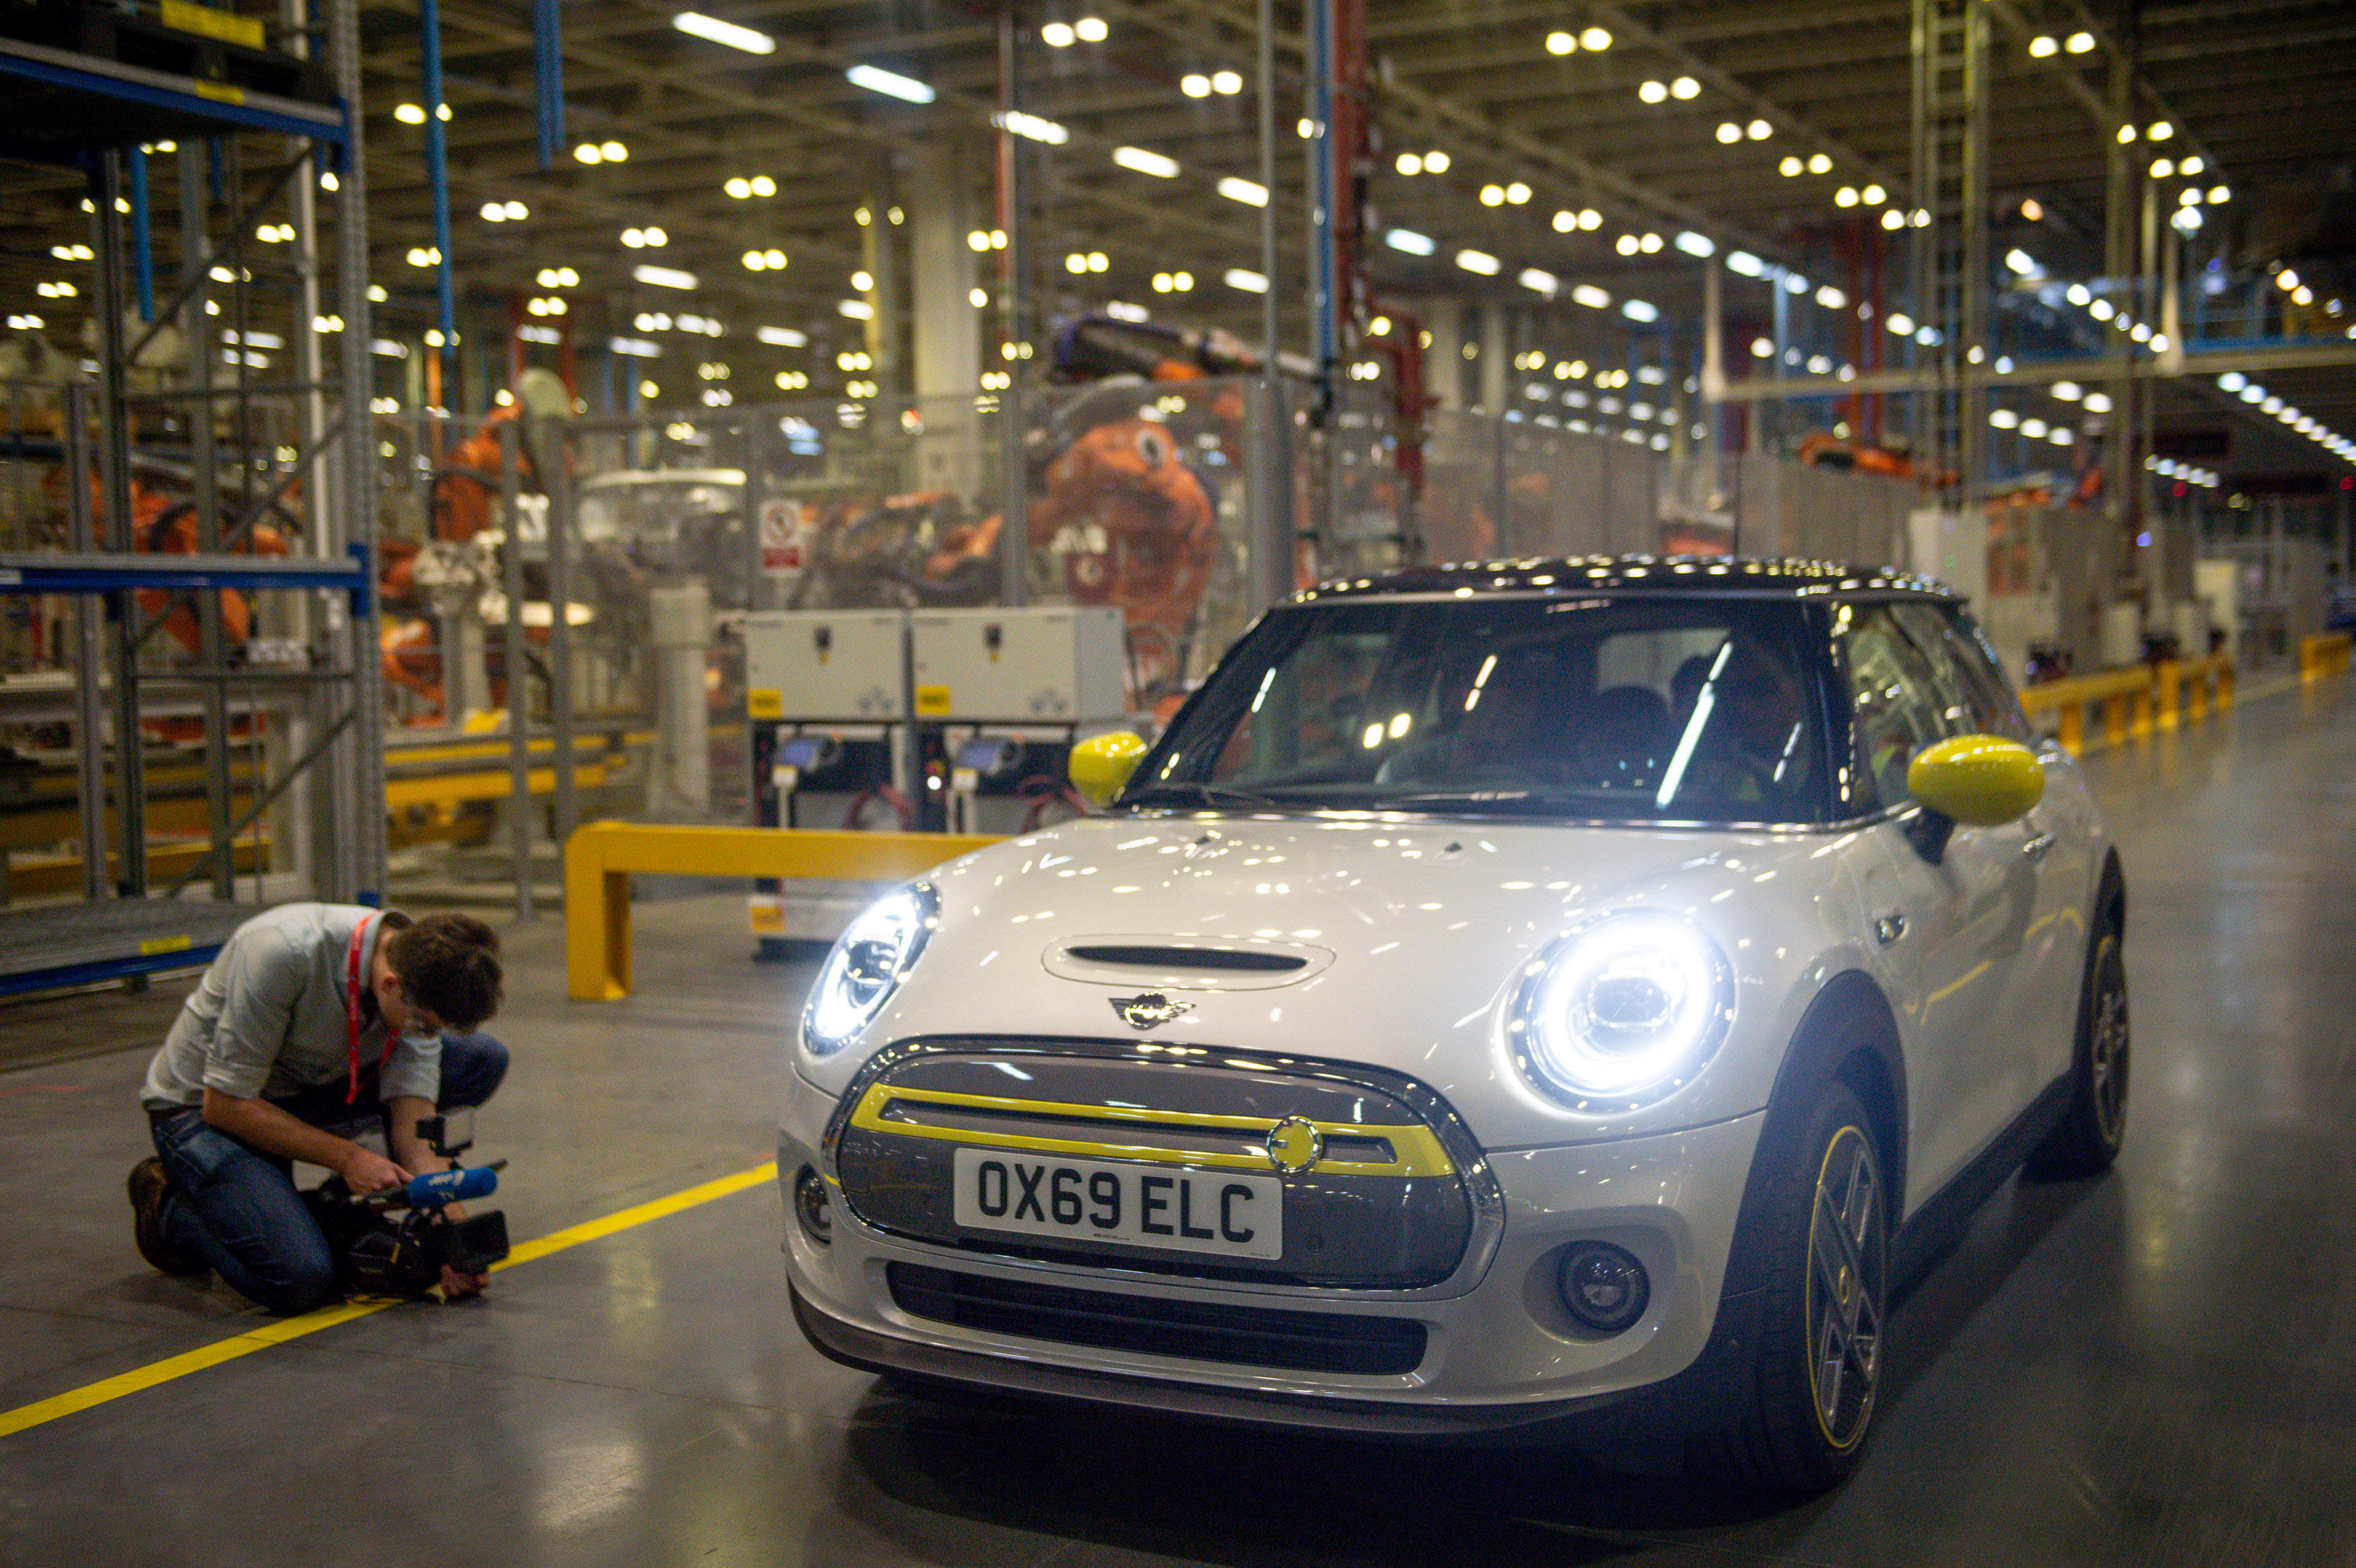 The MINI Electric is unveiled at the MINI factory in Cowley, Oxfordshire, before going into production later this year. (Jacob King/PA)